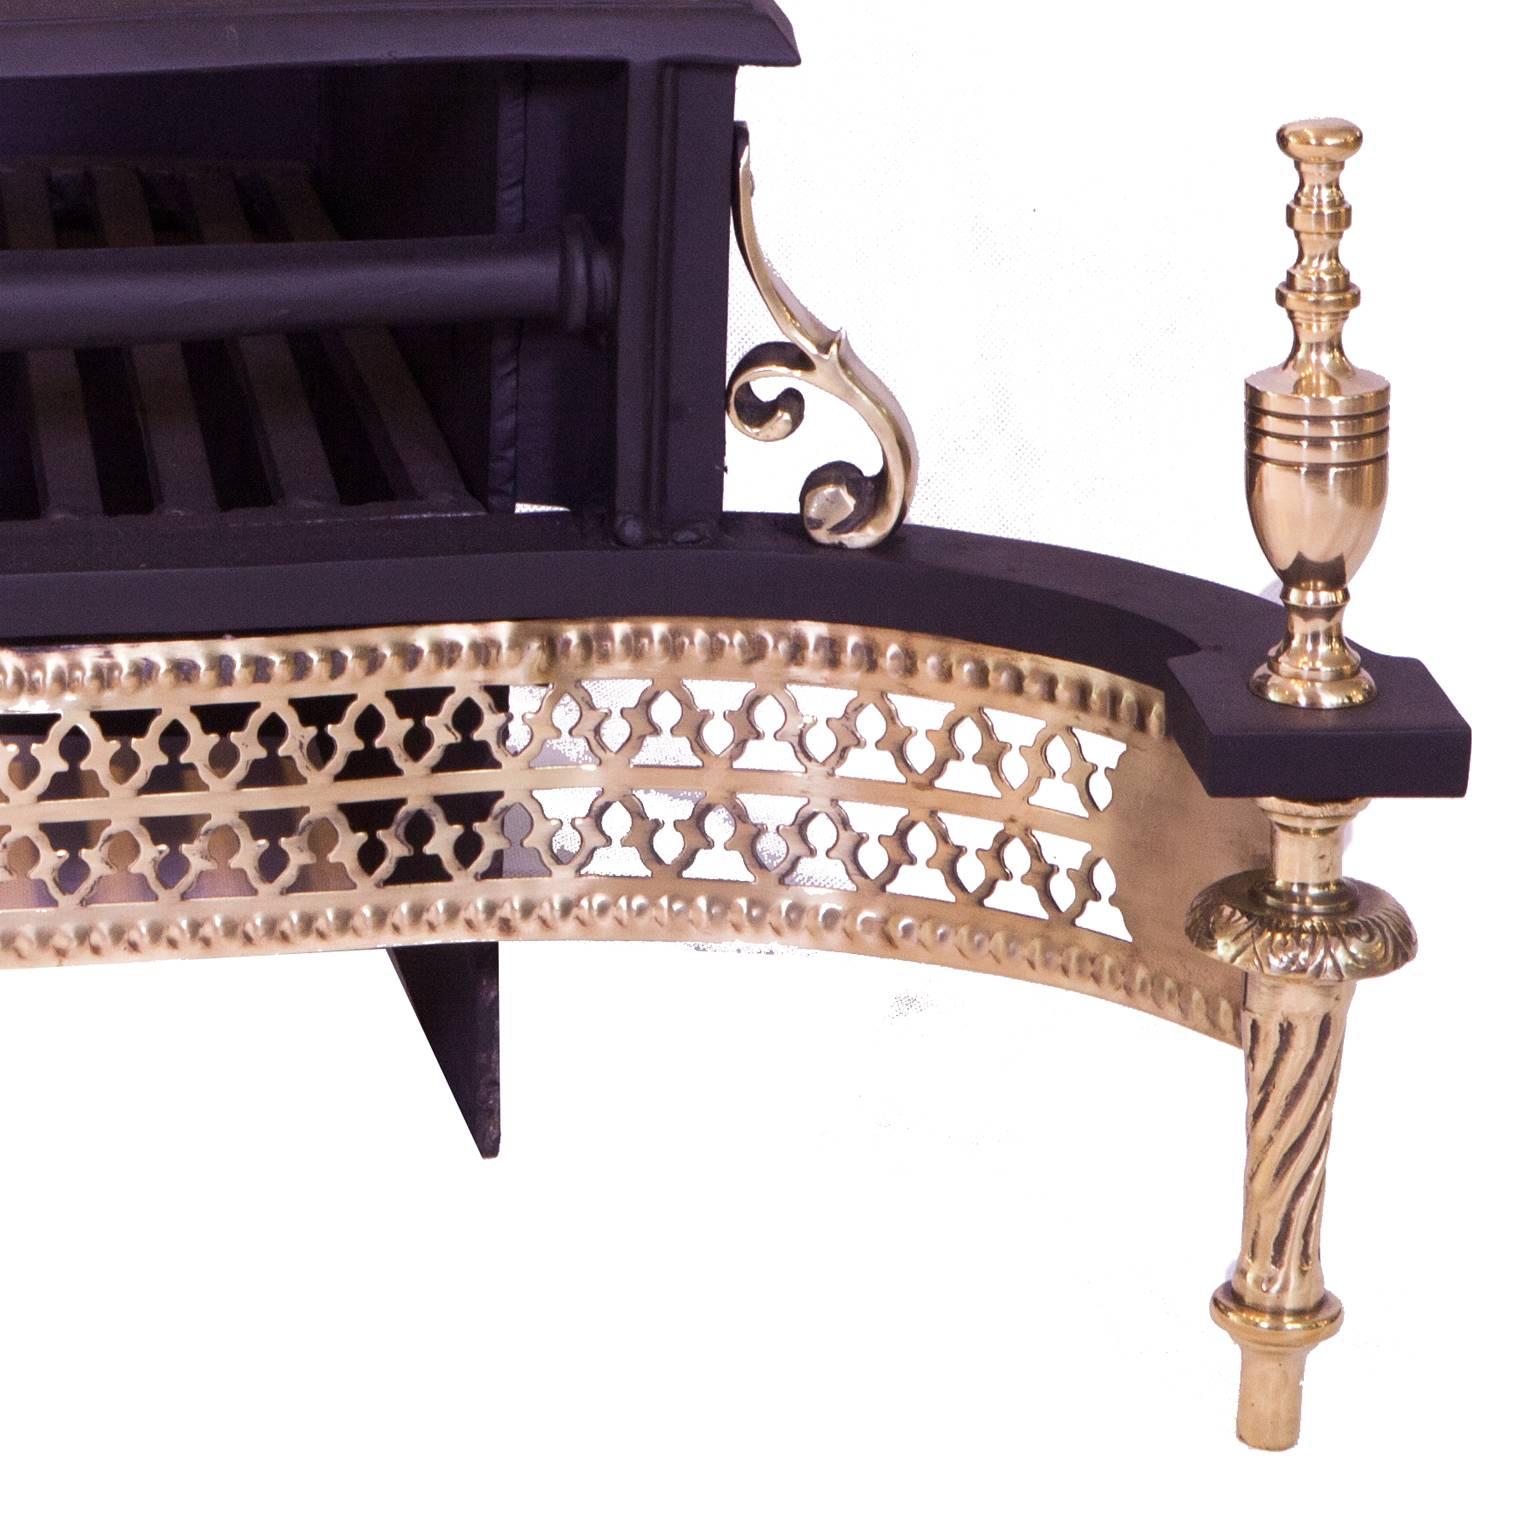 19th century splayed regency cast- iron and brass fretted fire grate inc finial.